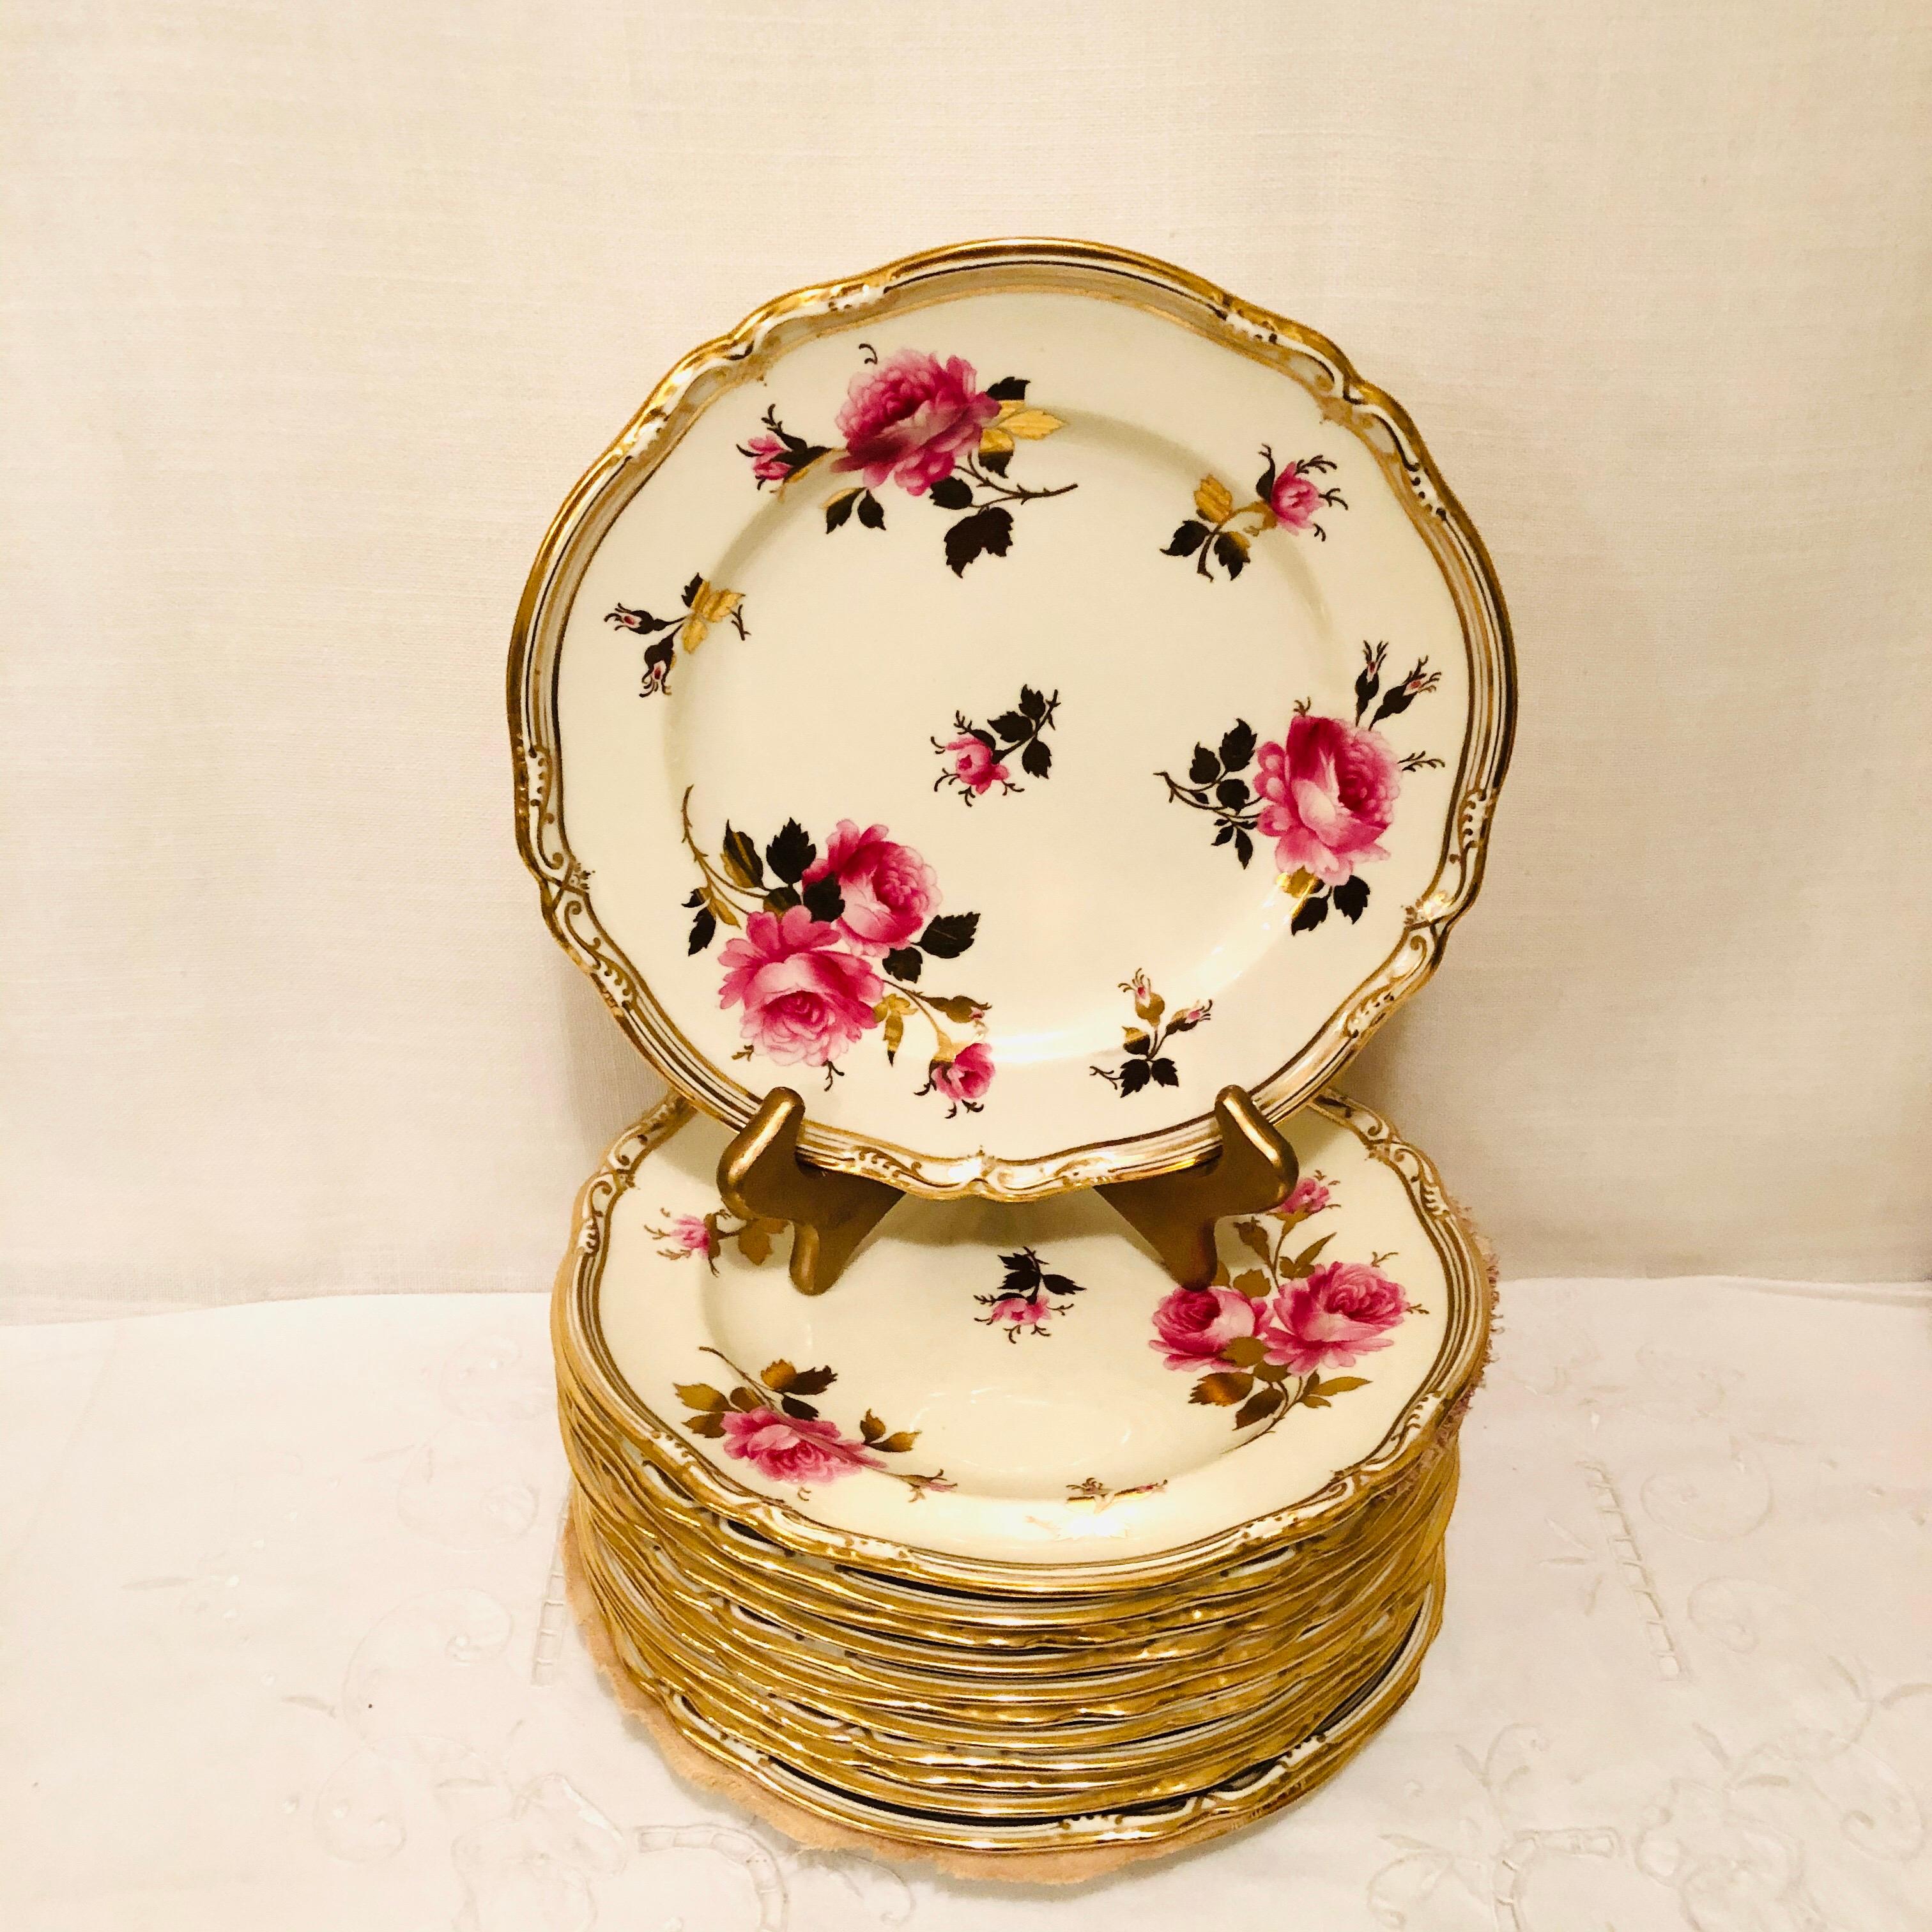 Early 20th Century Spode Made for Tiffany 68 Piece Dinner Service Decorated with Large Pink Roses